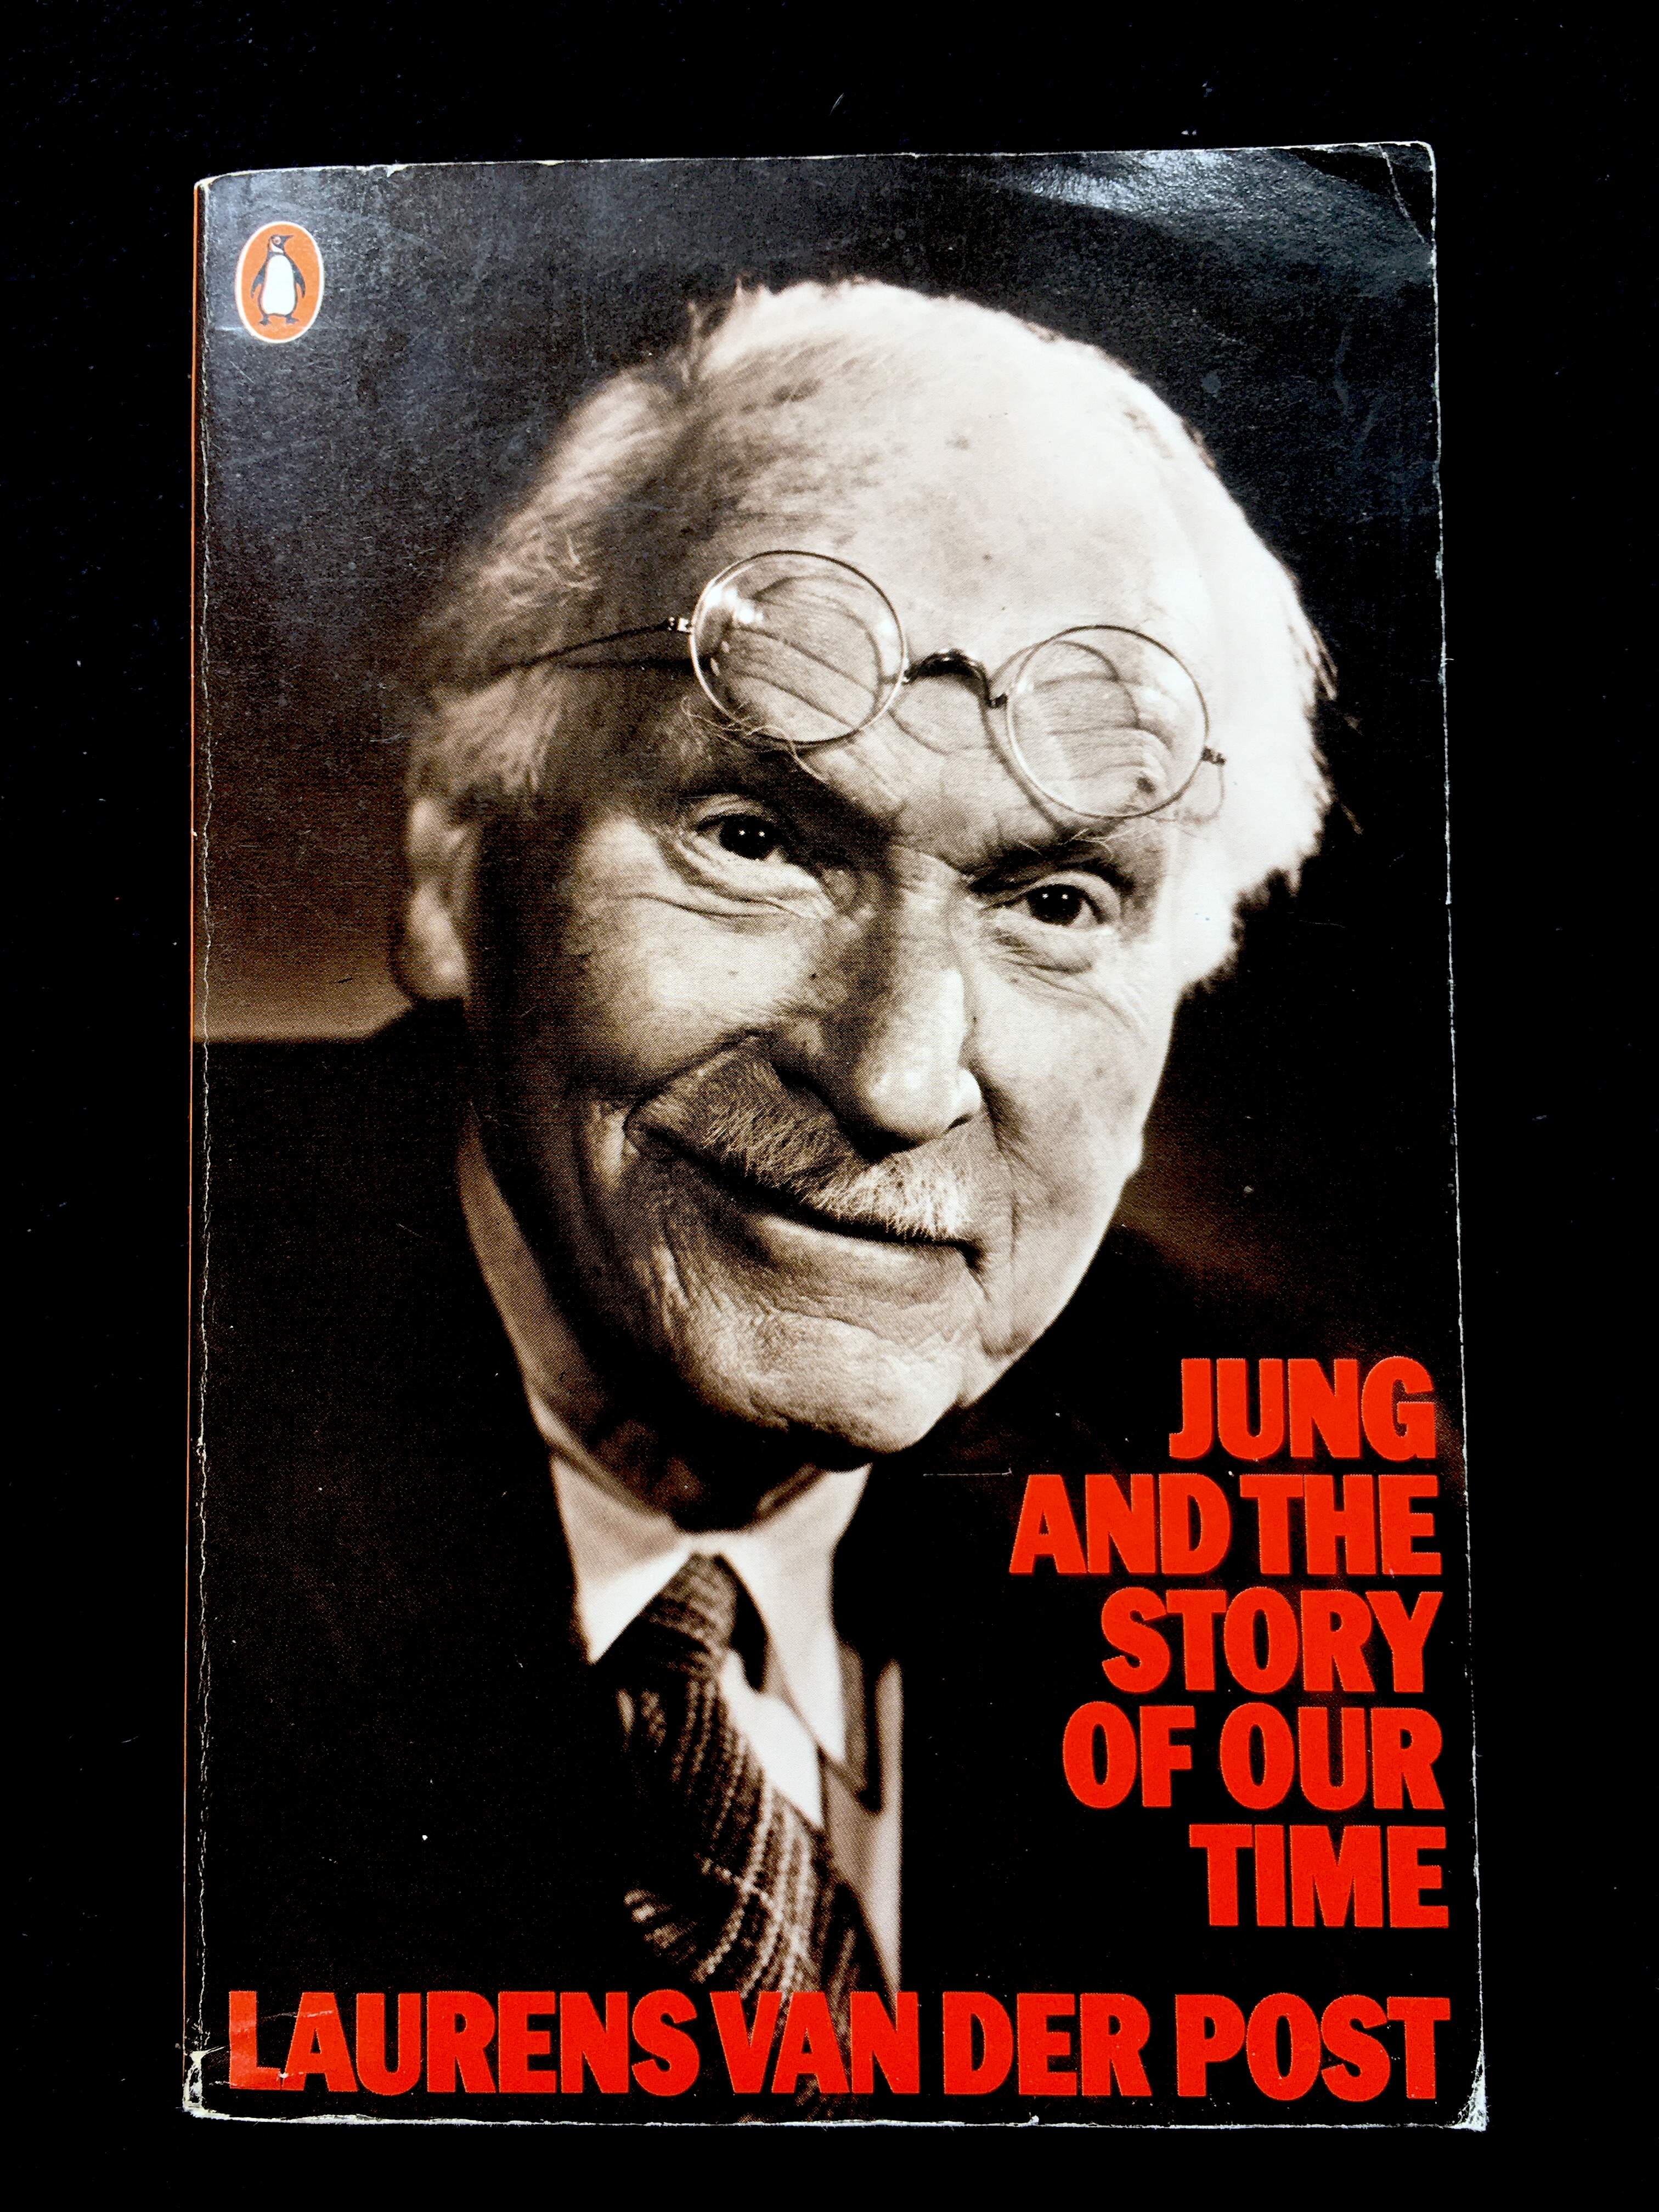 Jung And The Story Of Our Time by Laurens Van Der Post